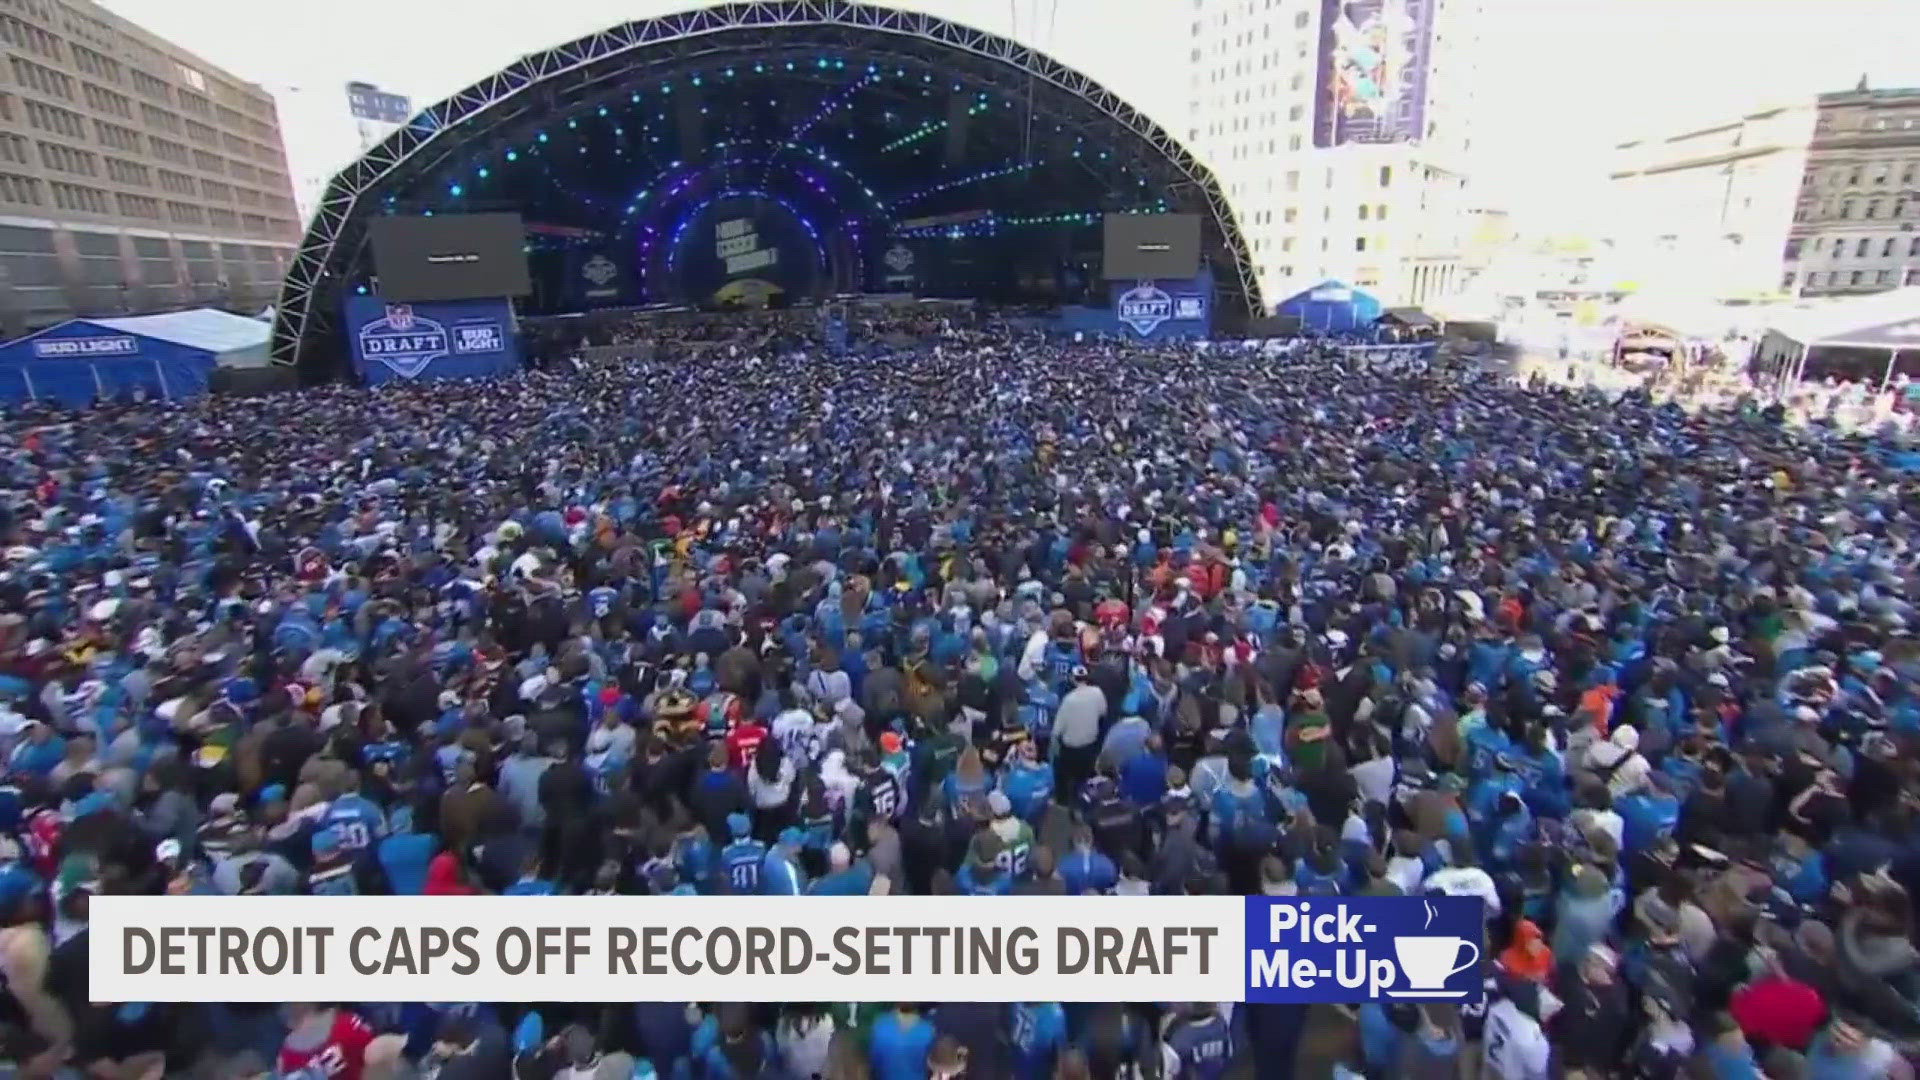 Detroit shattered the three-day attendance record with more than 775,000 people visiting for the NFL Draft.